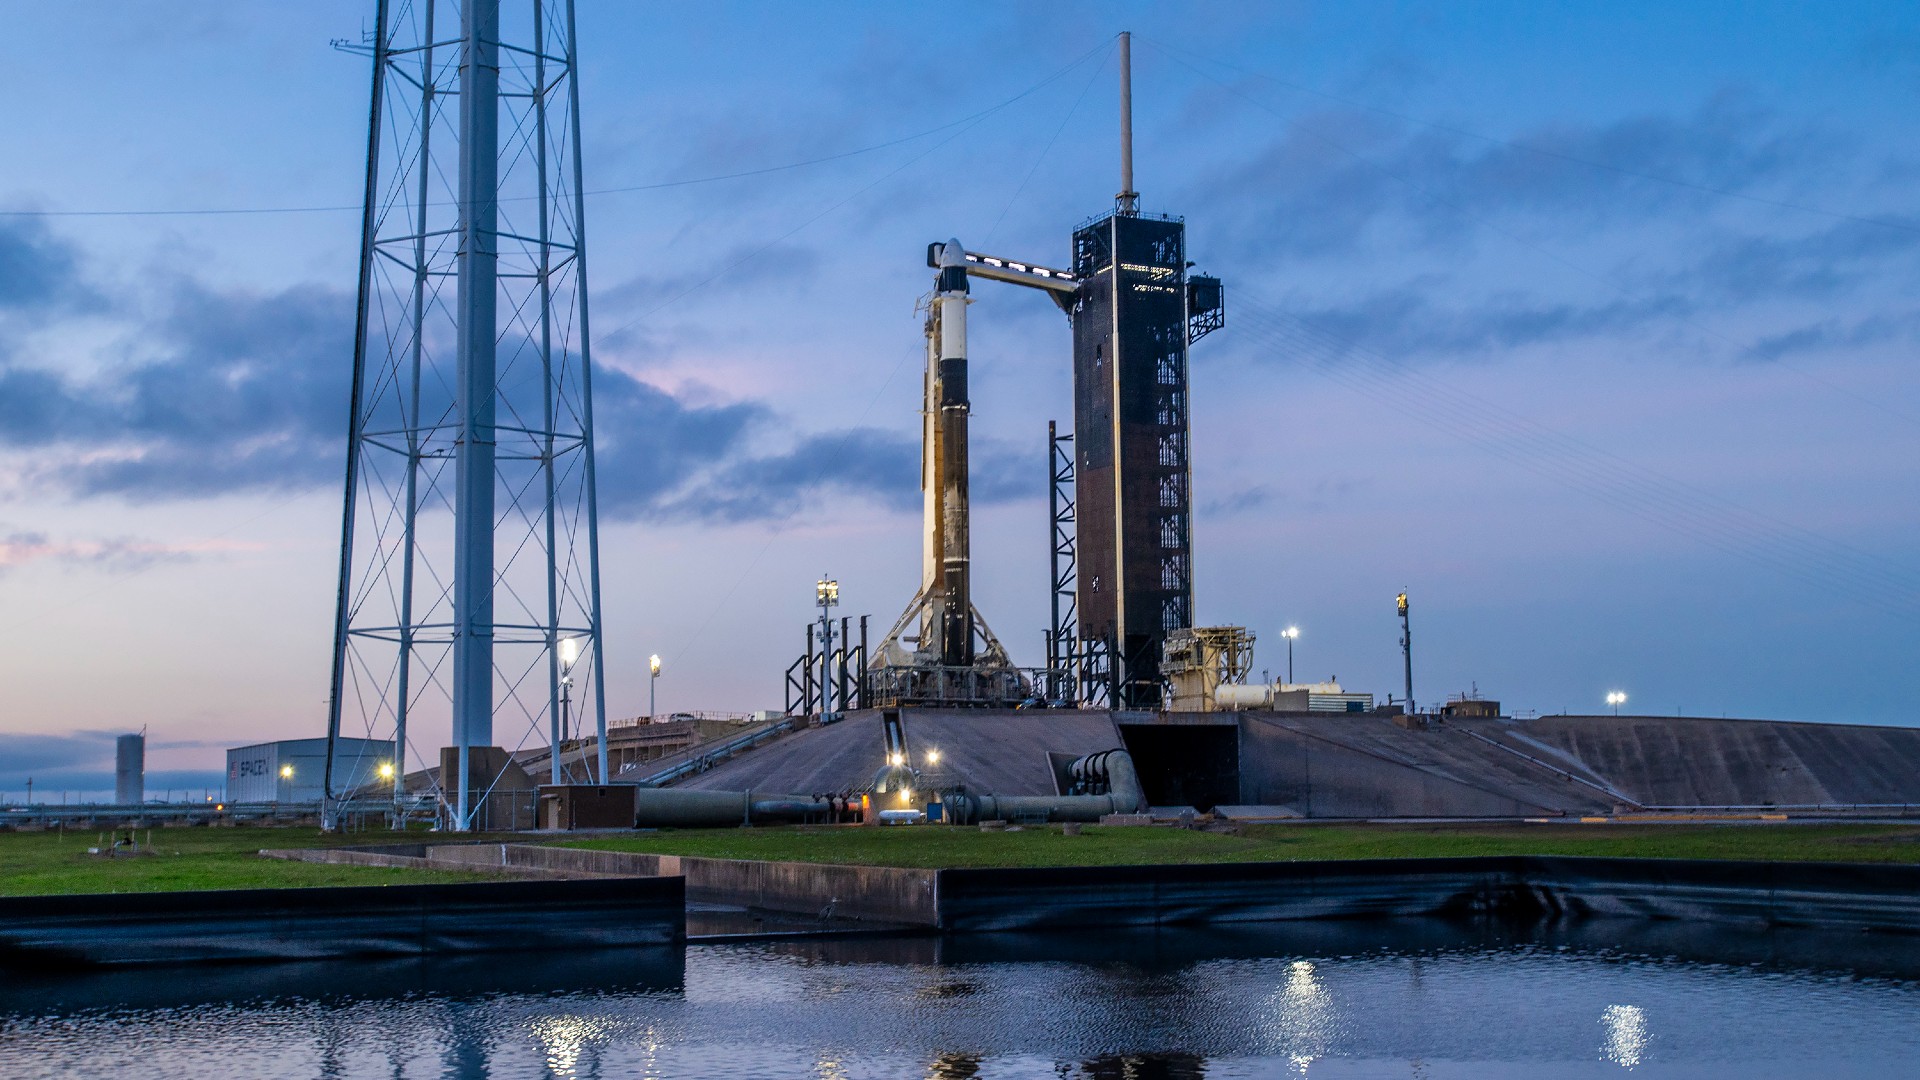 SpaceX delays launch of private Ax-3 astronaut mission to Jan. 18